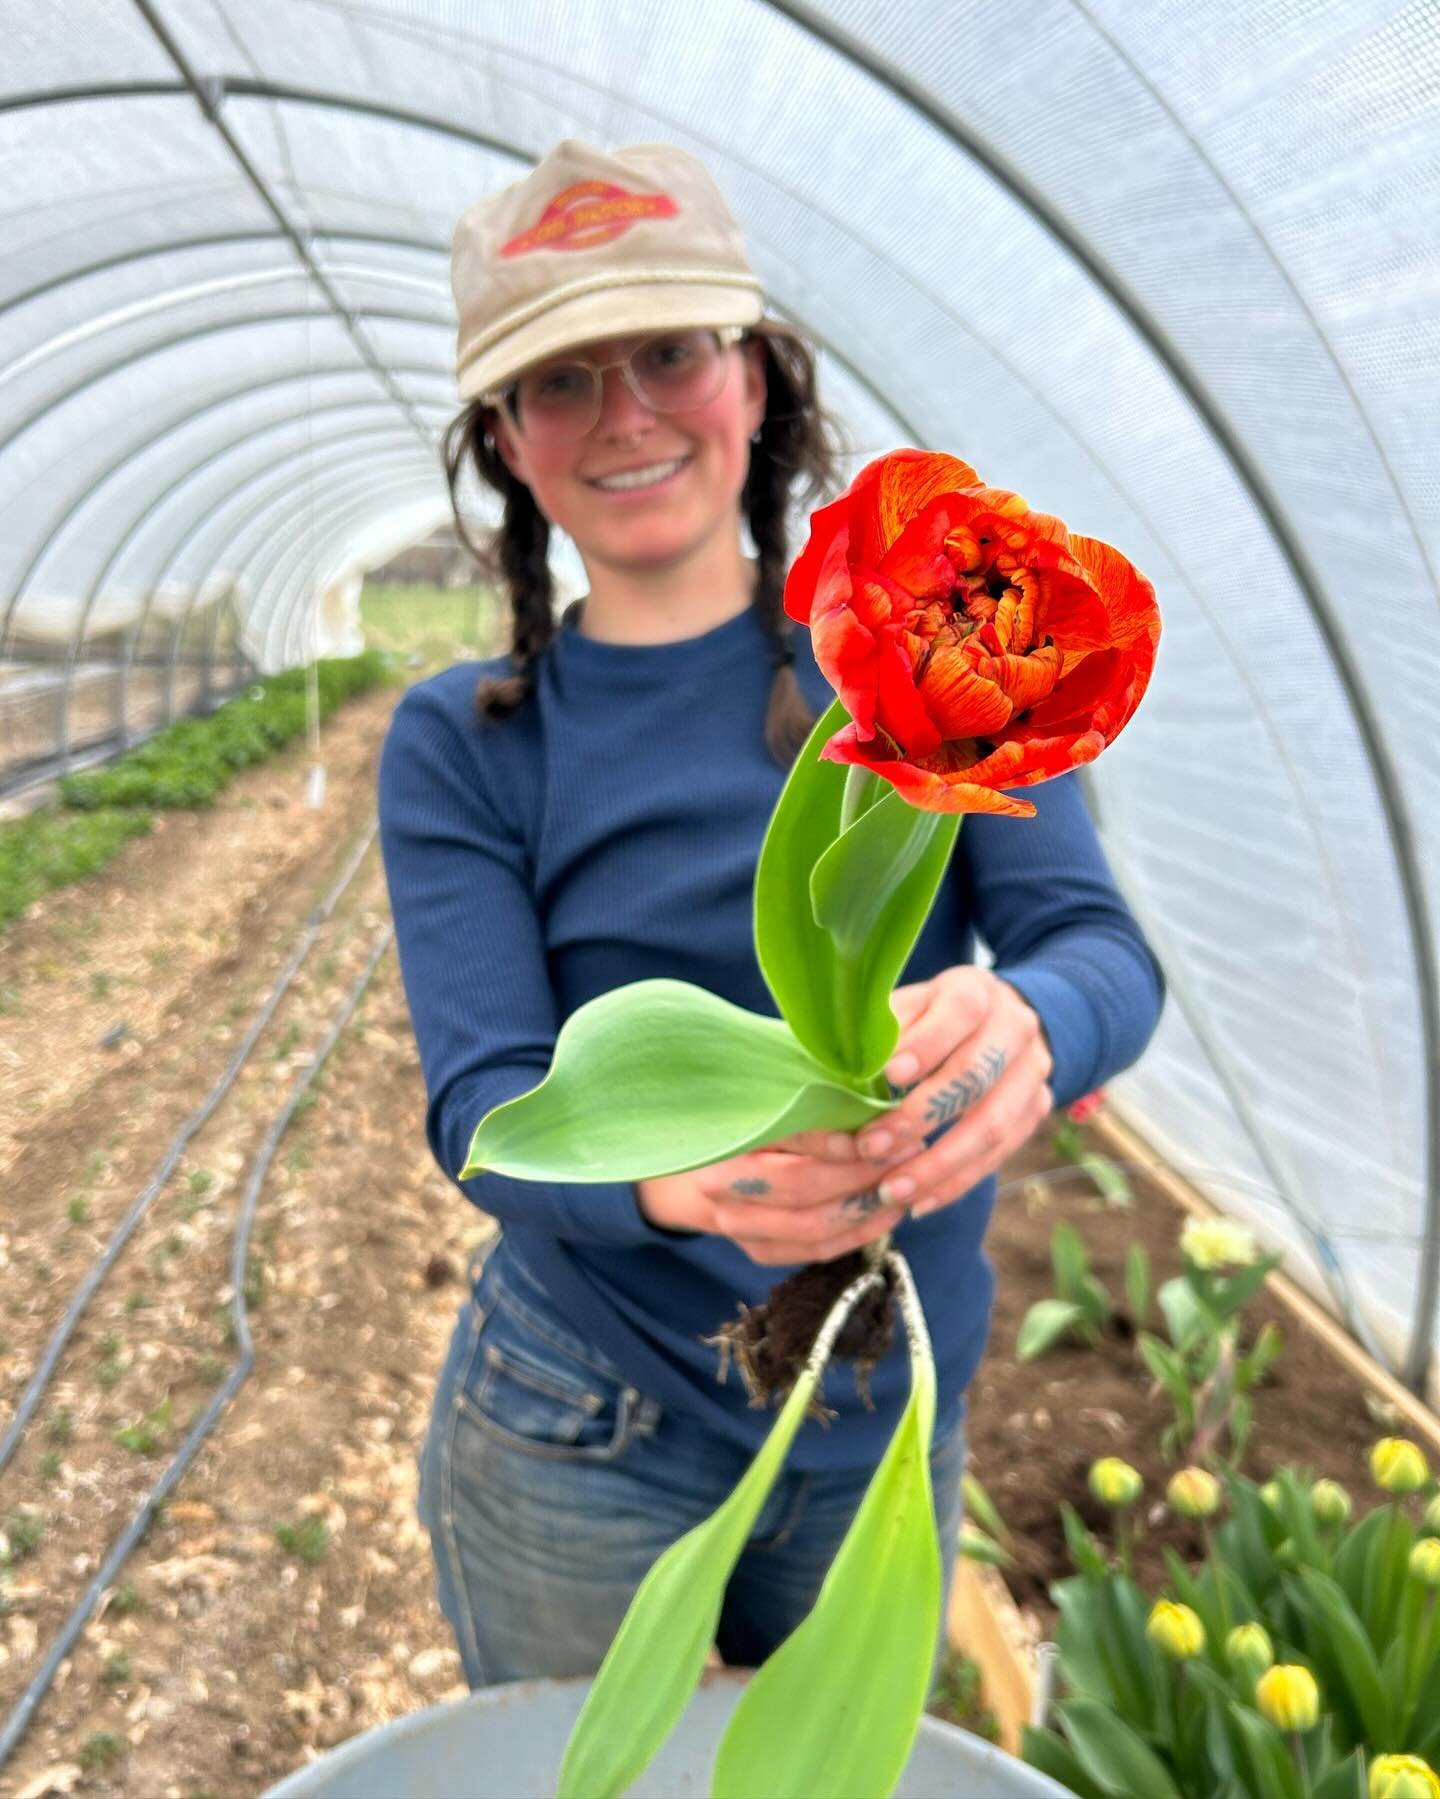 Come get in on the tulip fever this weekend at the spring @backyardmarketinbf from 10-3pm at Edith Wolford Elementary. This might be the only time we will have tulips available to buy outside of our subscription this spring, so come load up! 

We lov